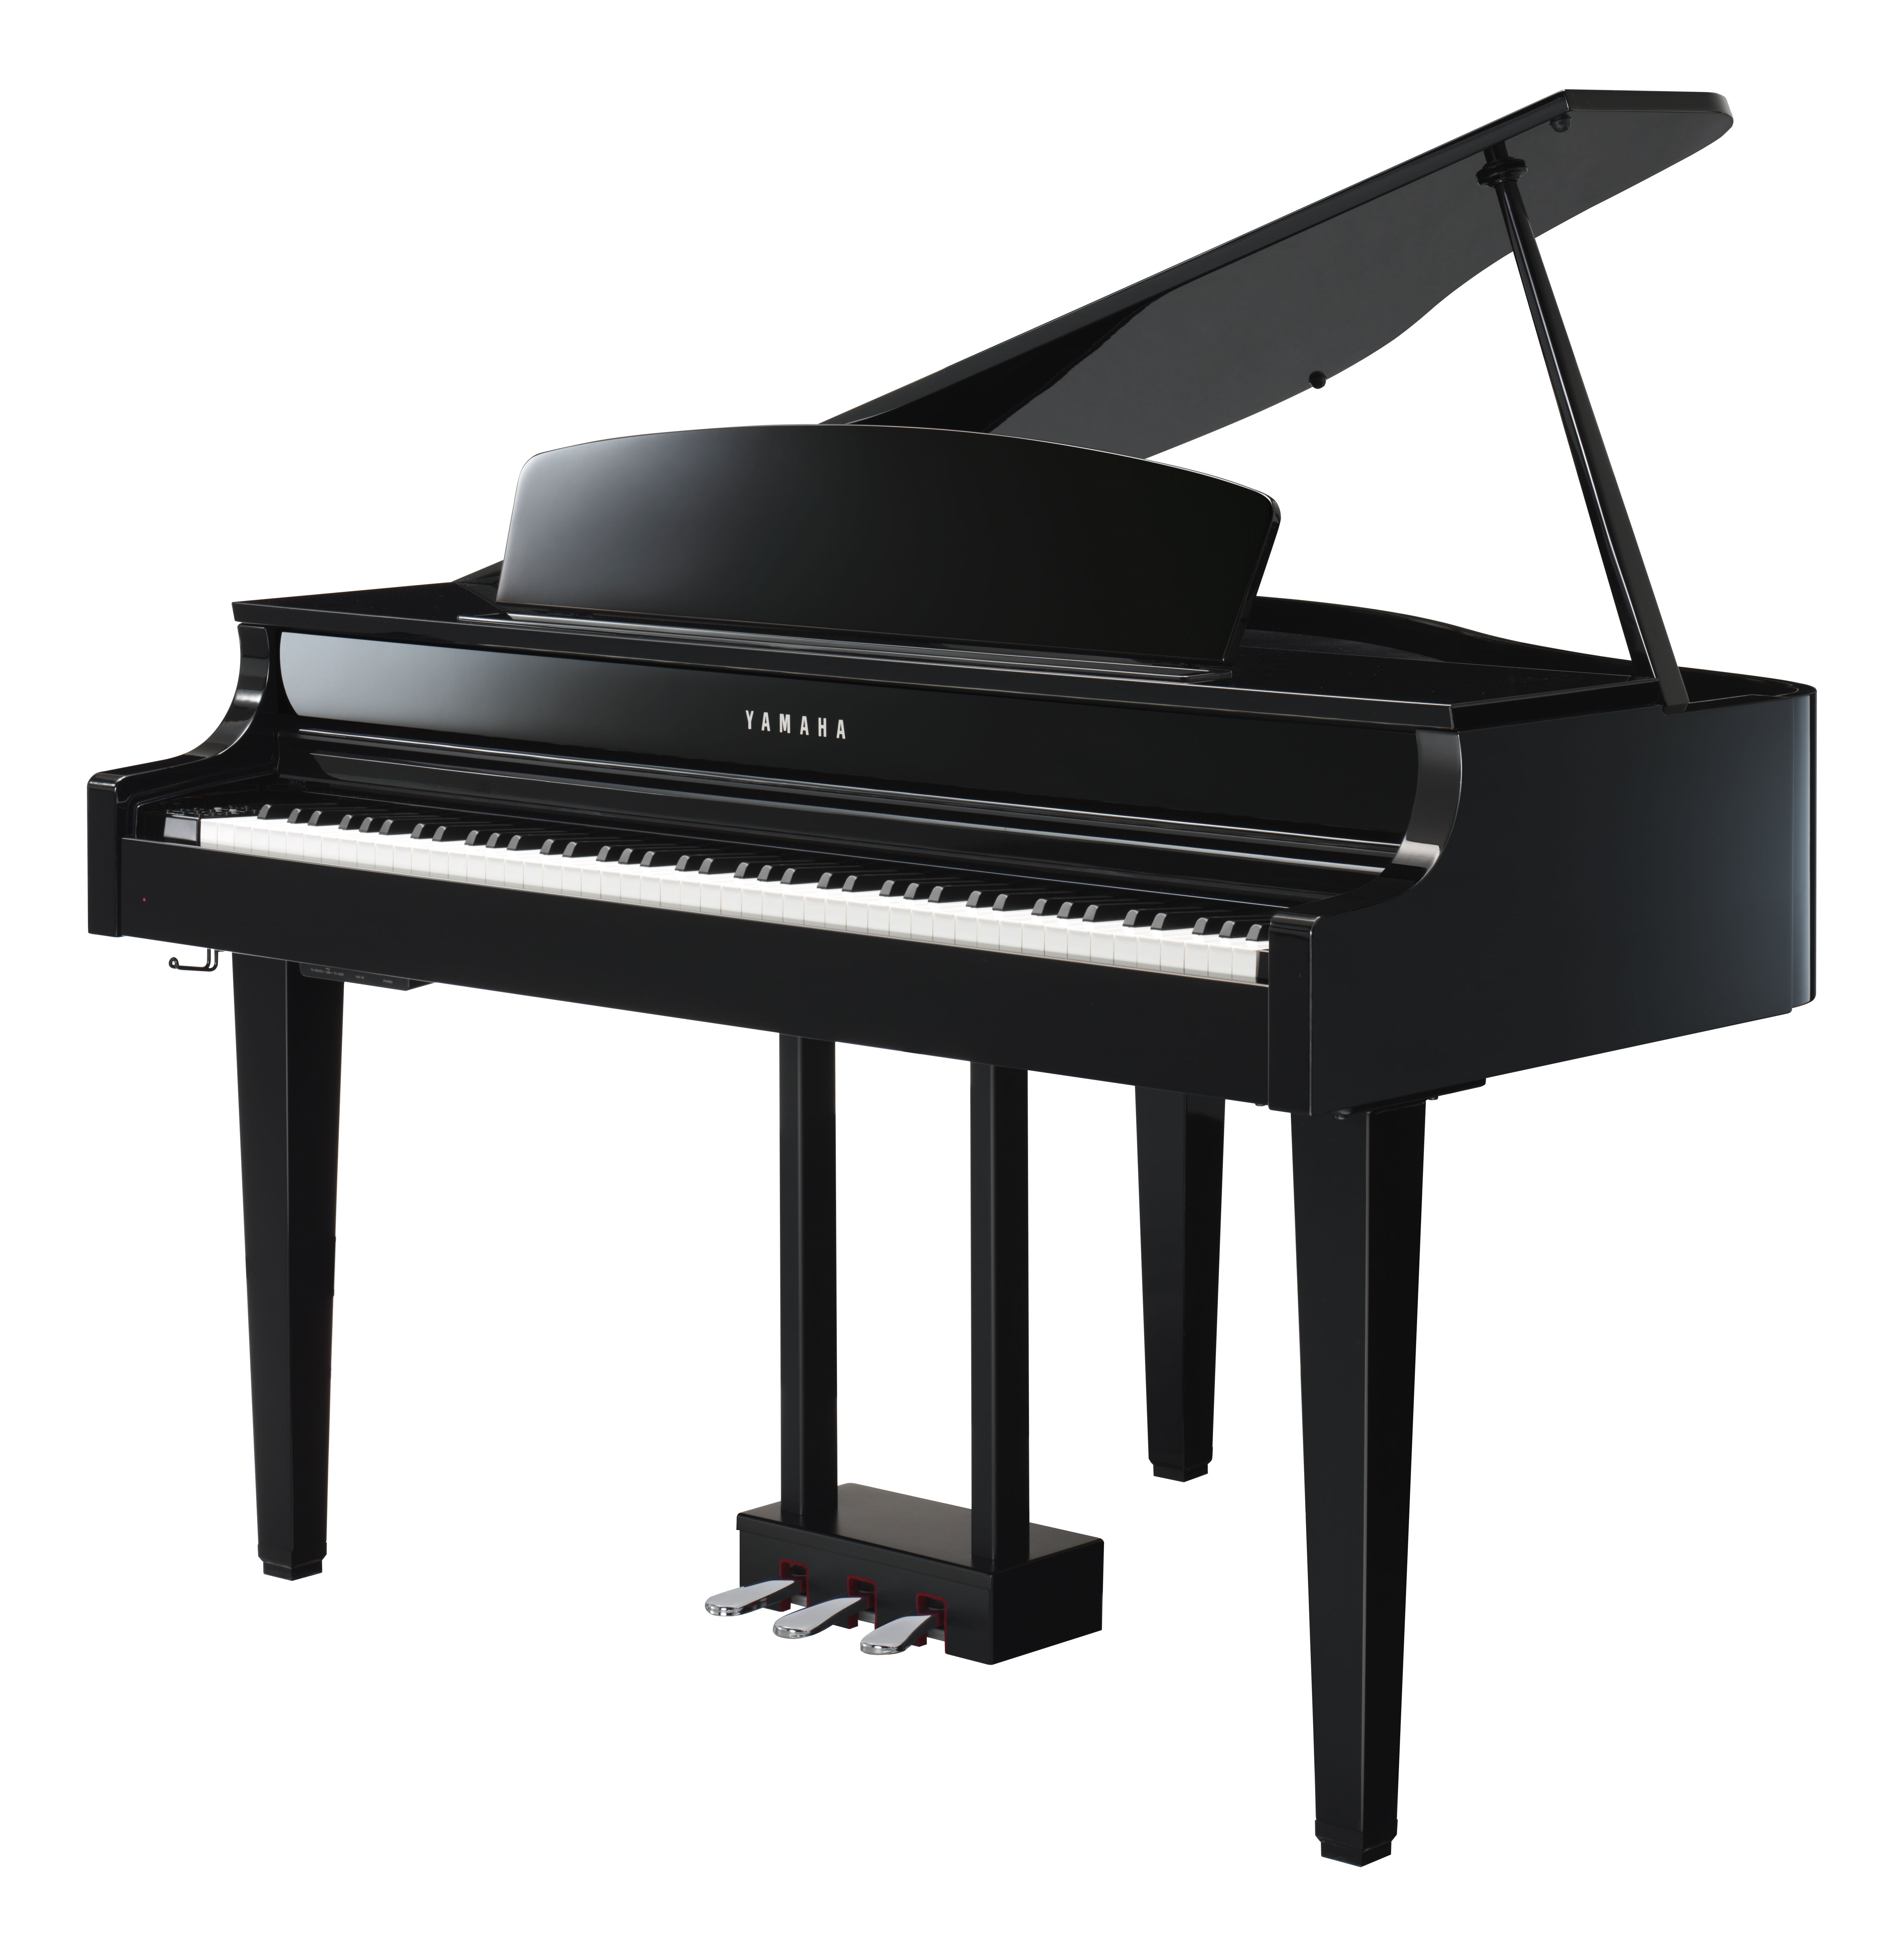 Host of Every week apparatus CLP-665GP - Overview - Clavinova - Pianos - Musical Instruments - Products  - Yamaha USA